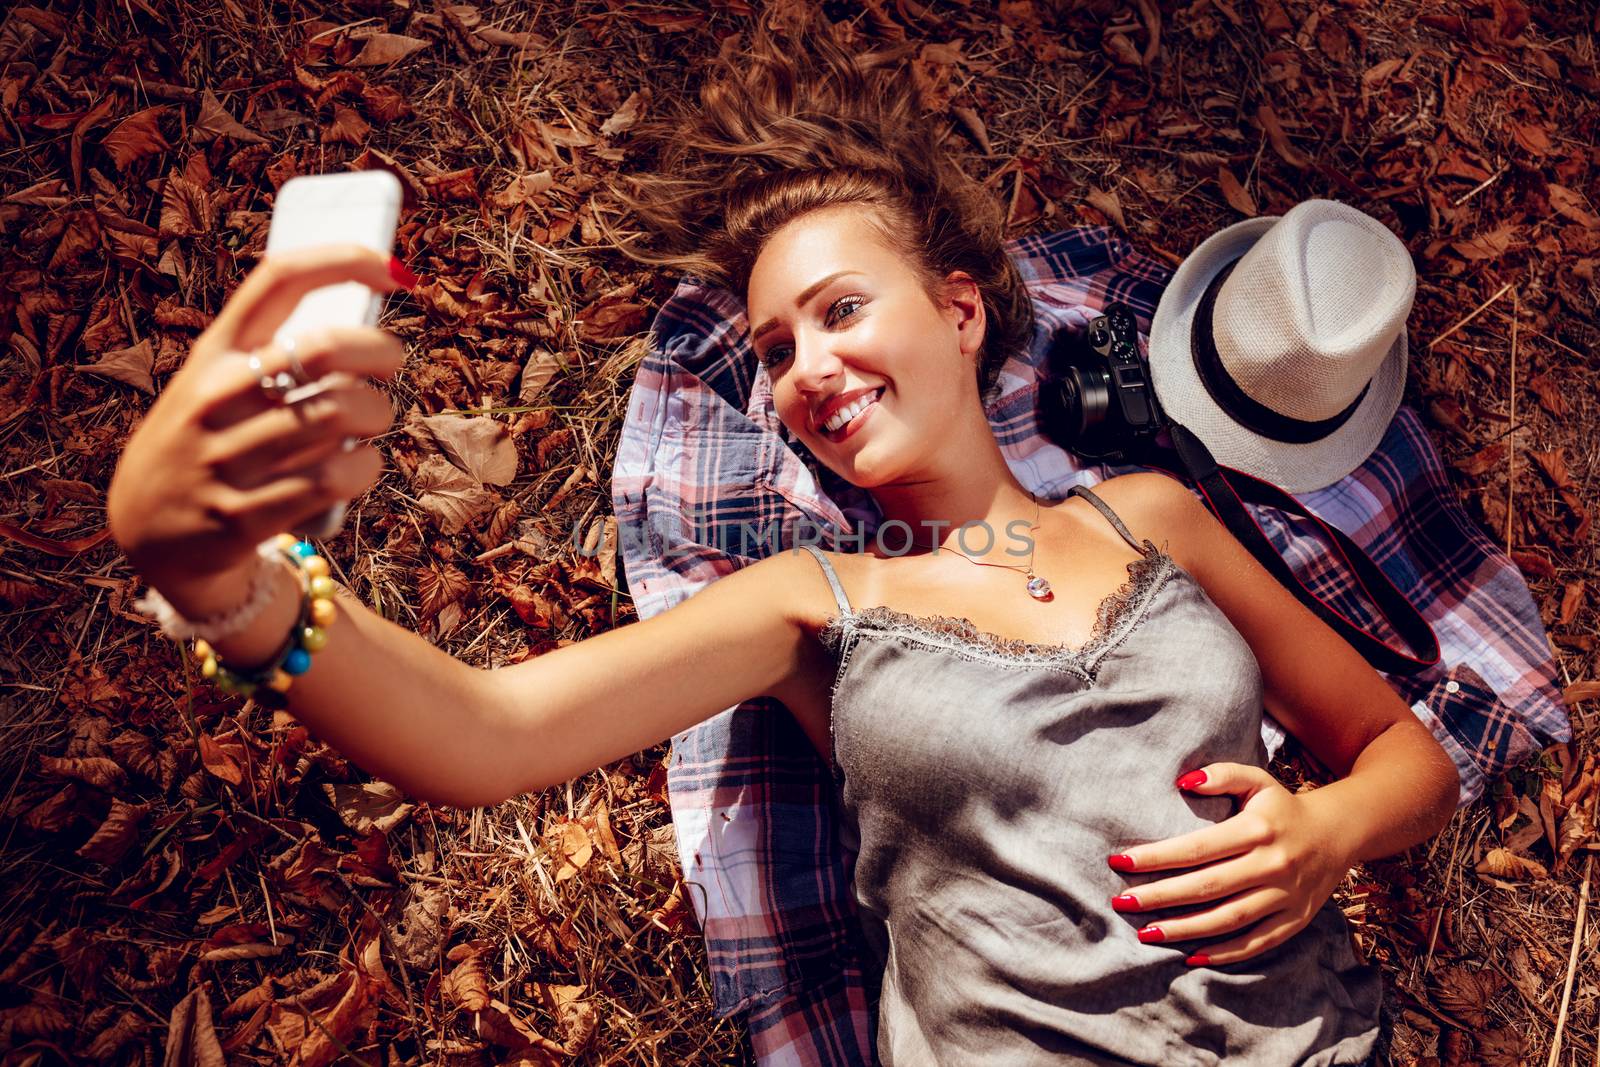 Beautiful smiling girl taking selfie in nature in autumn. She is lying on the falls leaves.